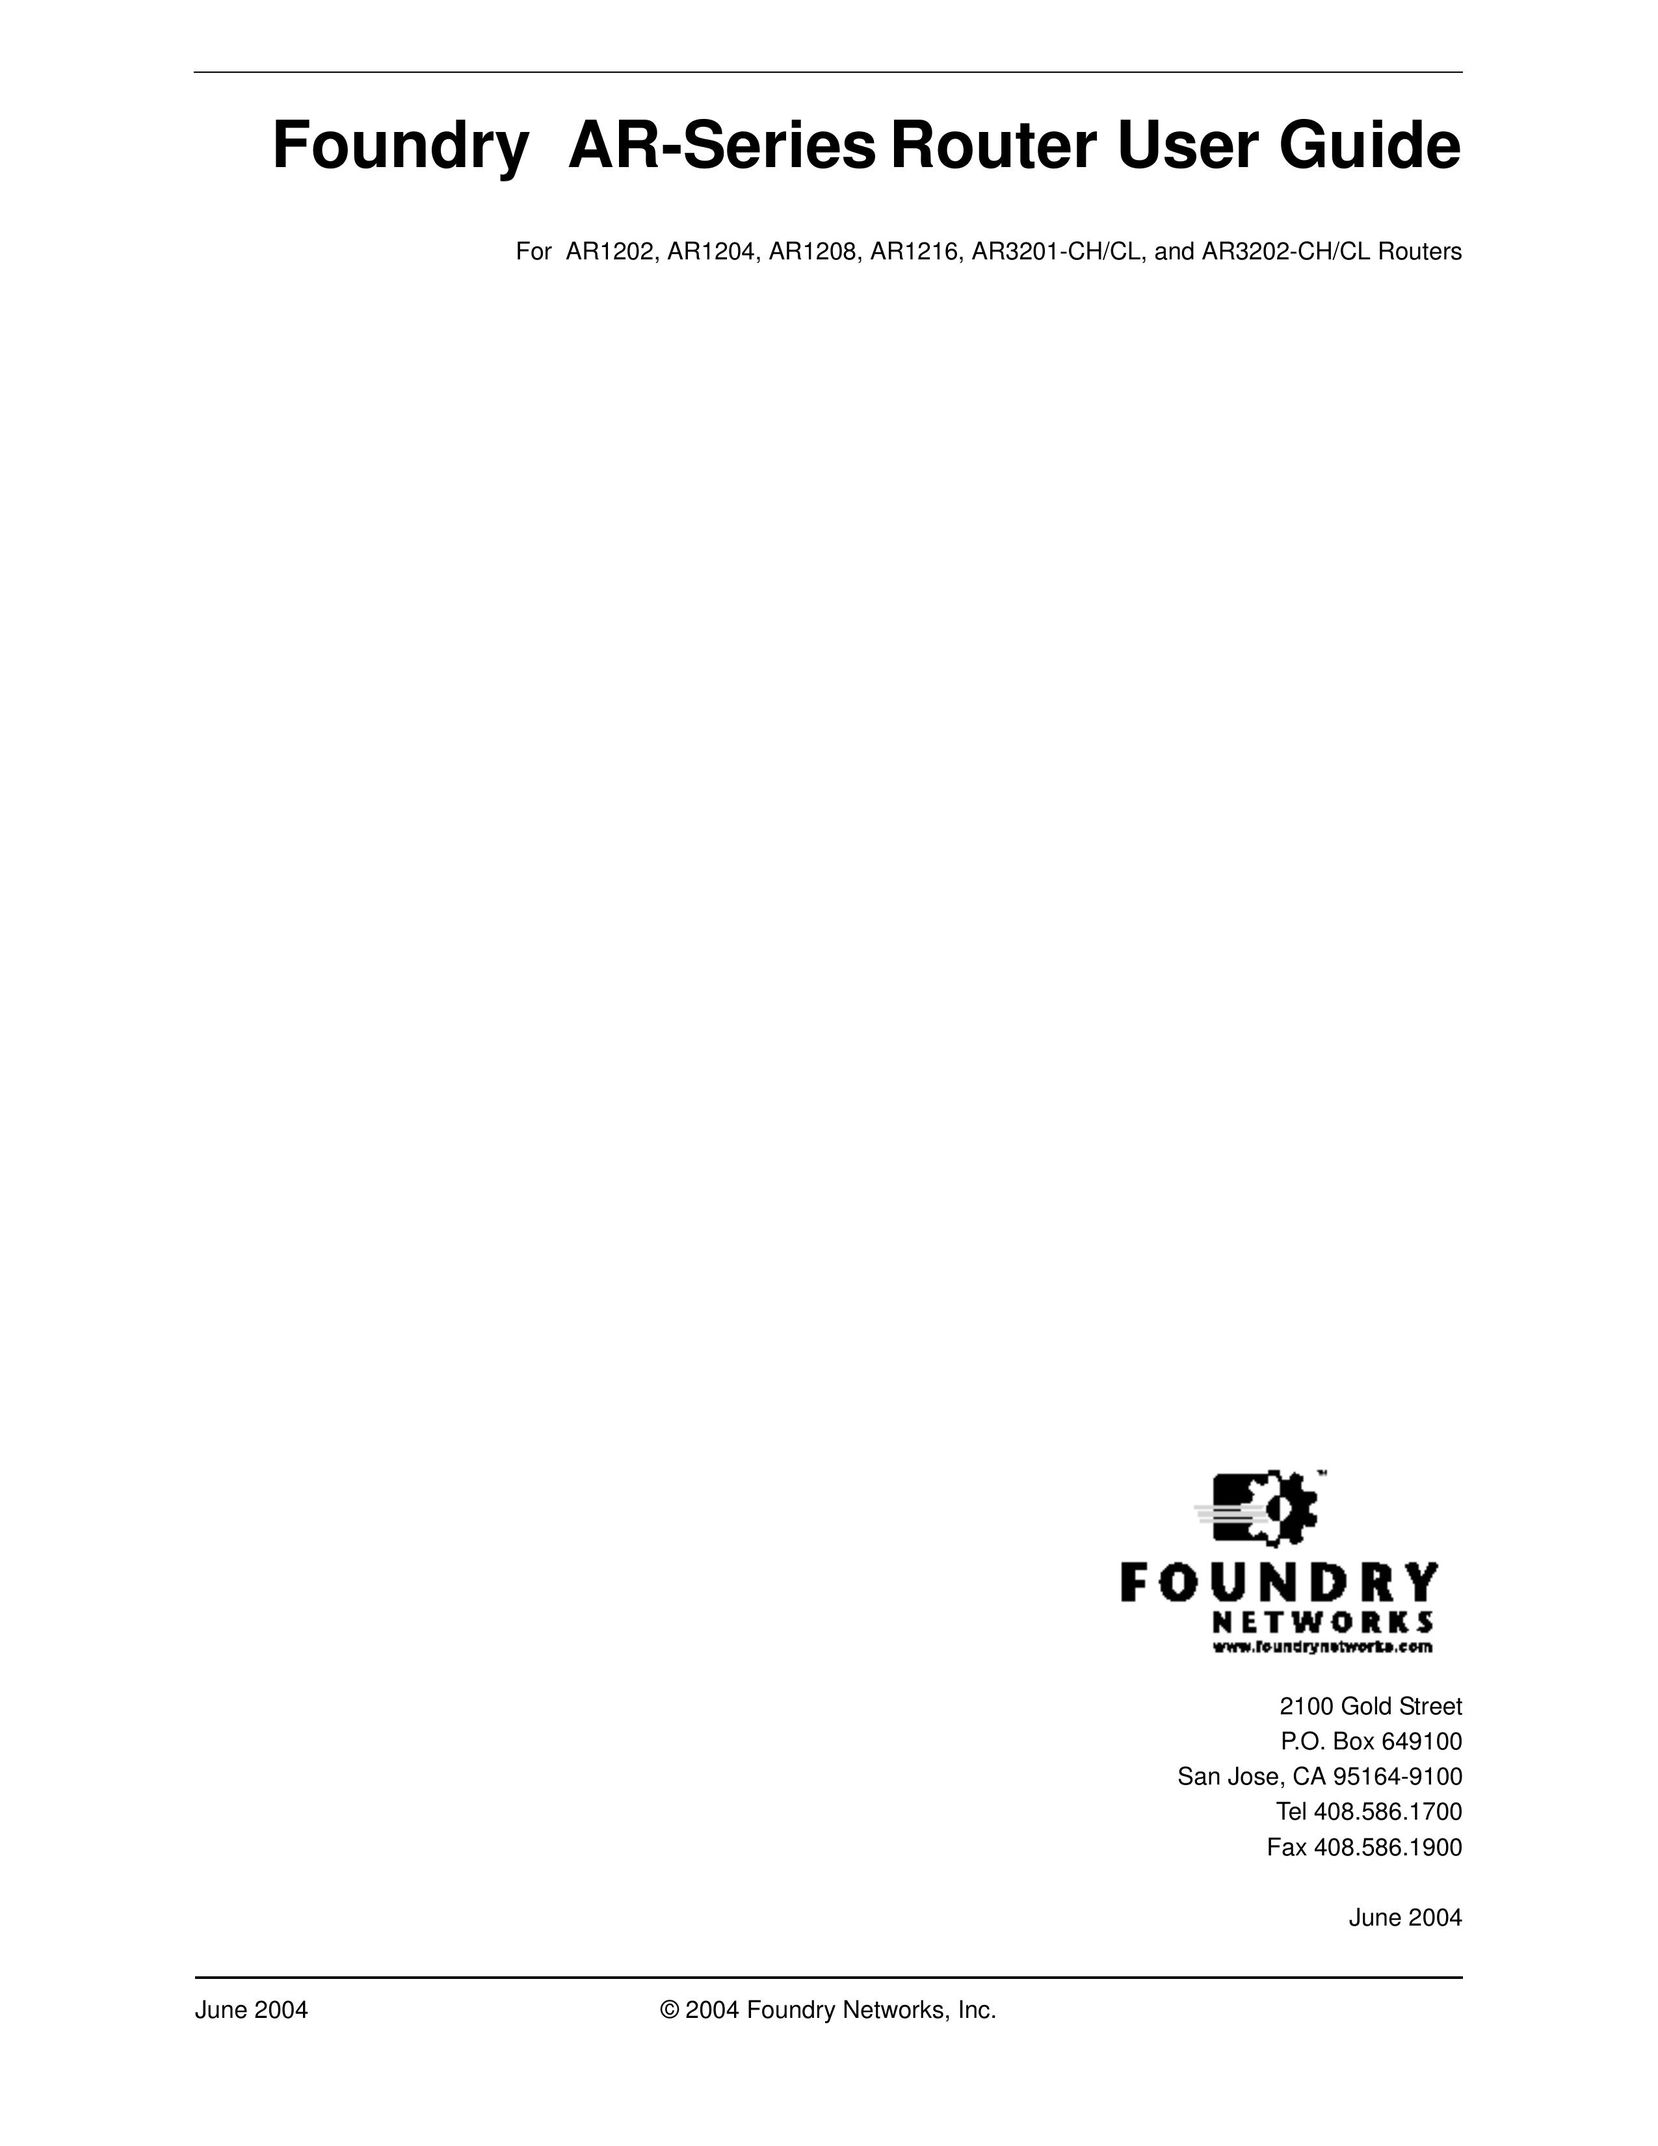 Foundry Networks AR1208 Network Router User Manual